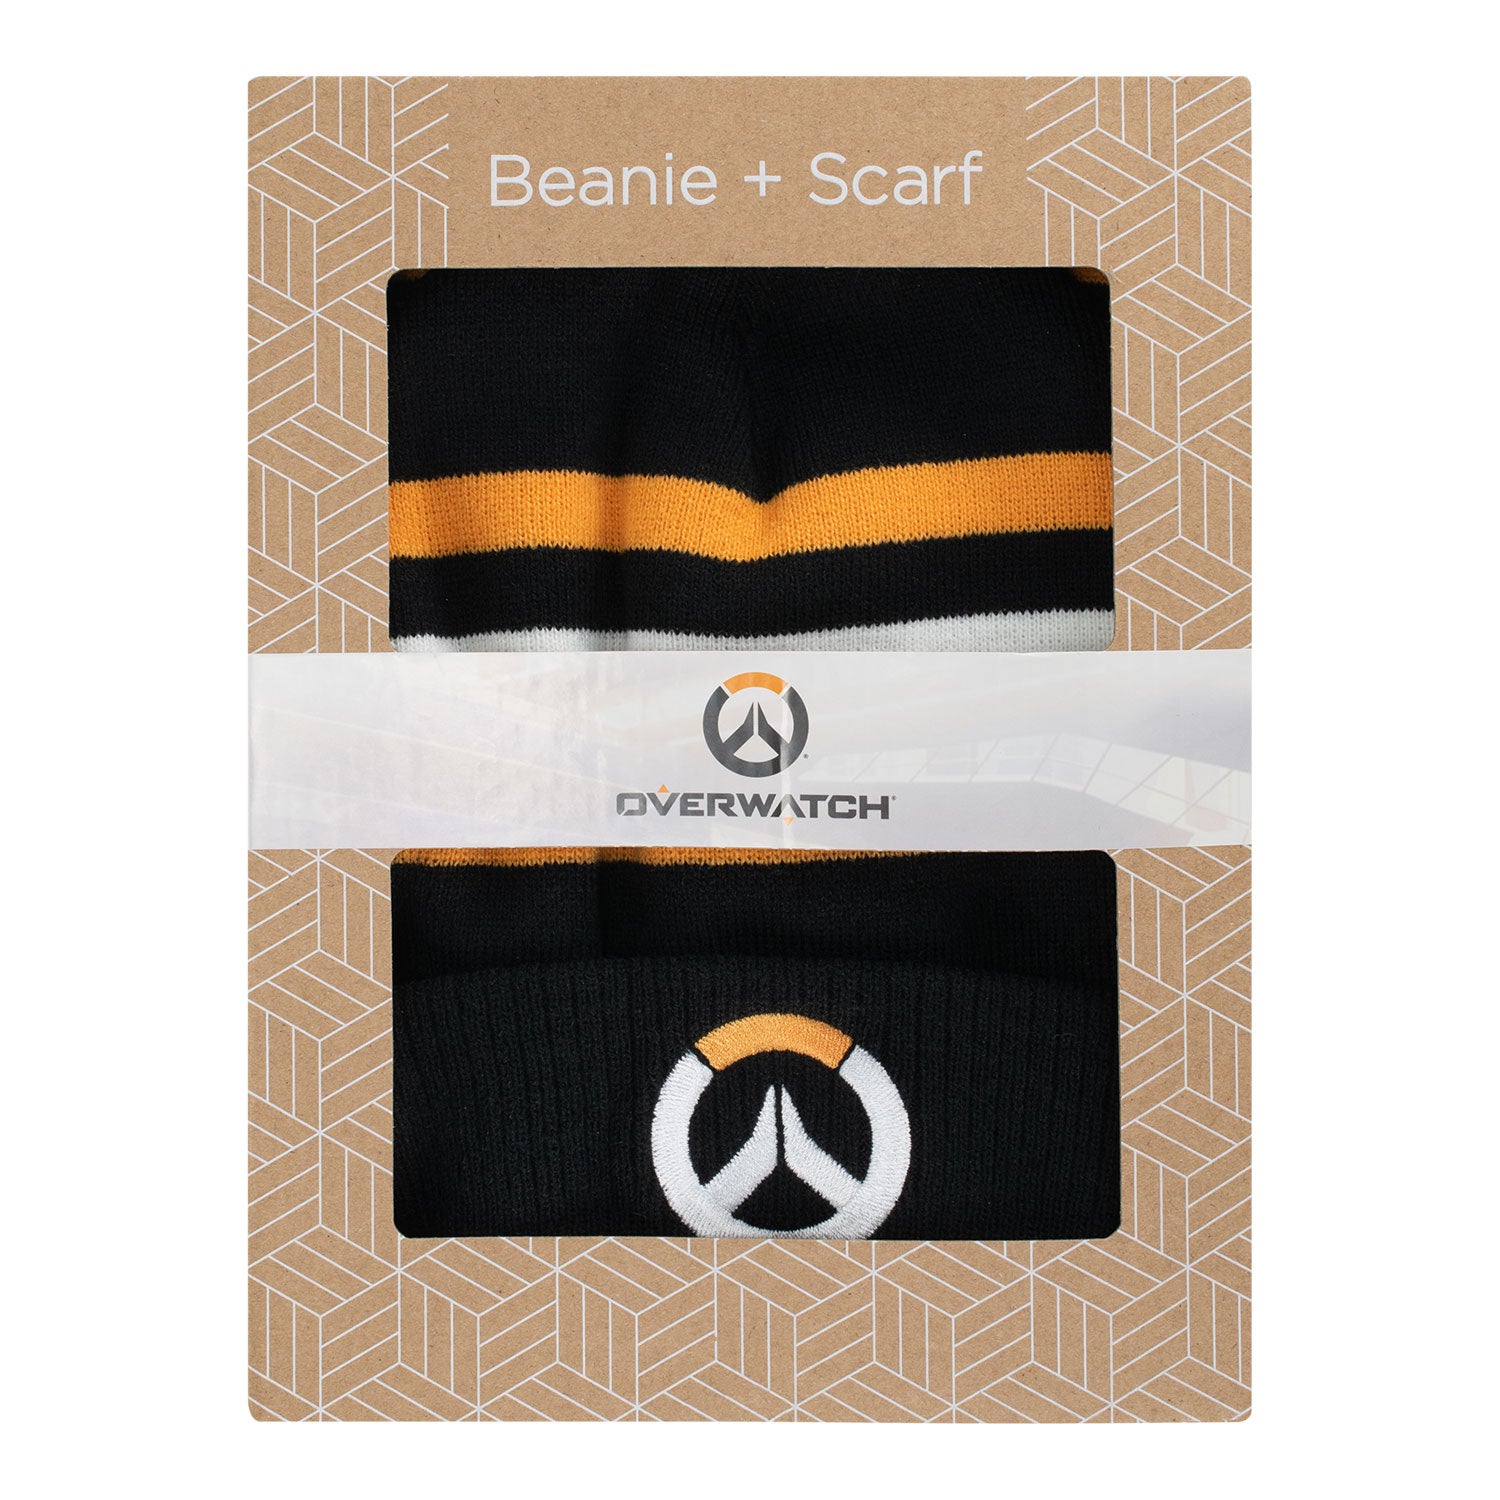 Overwatch Gift Set Beanie & Scarf - Packaged View